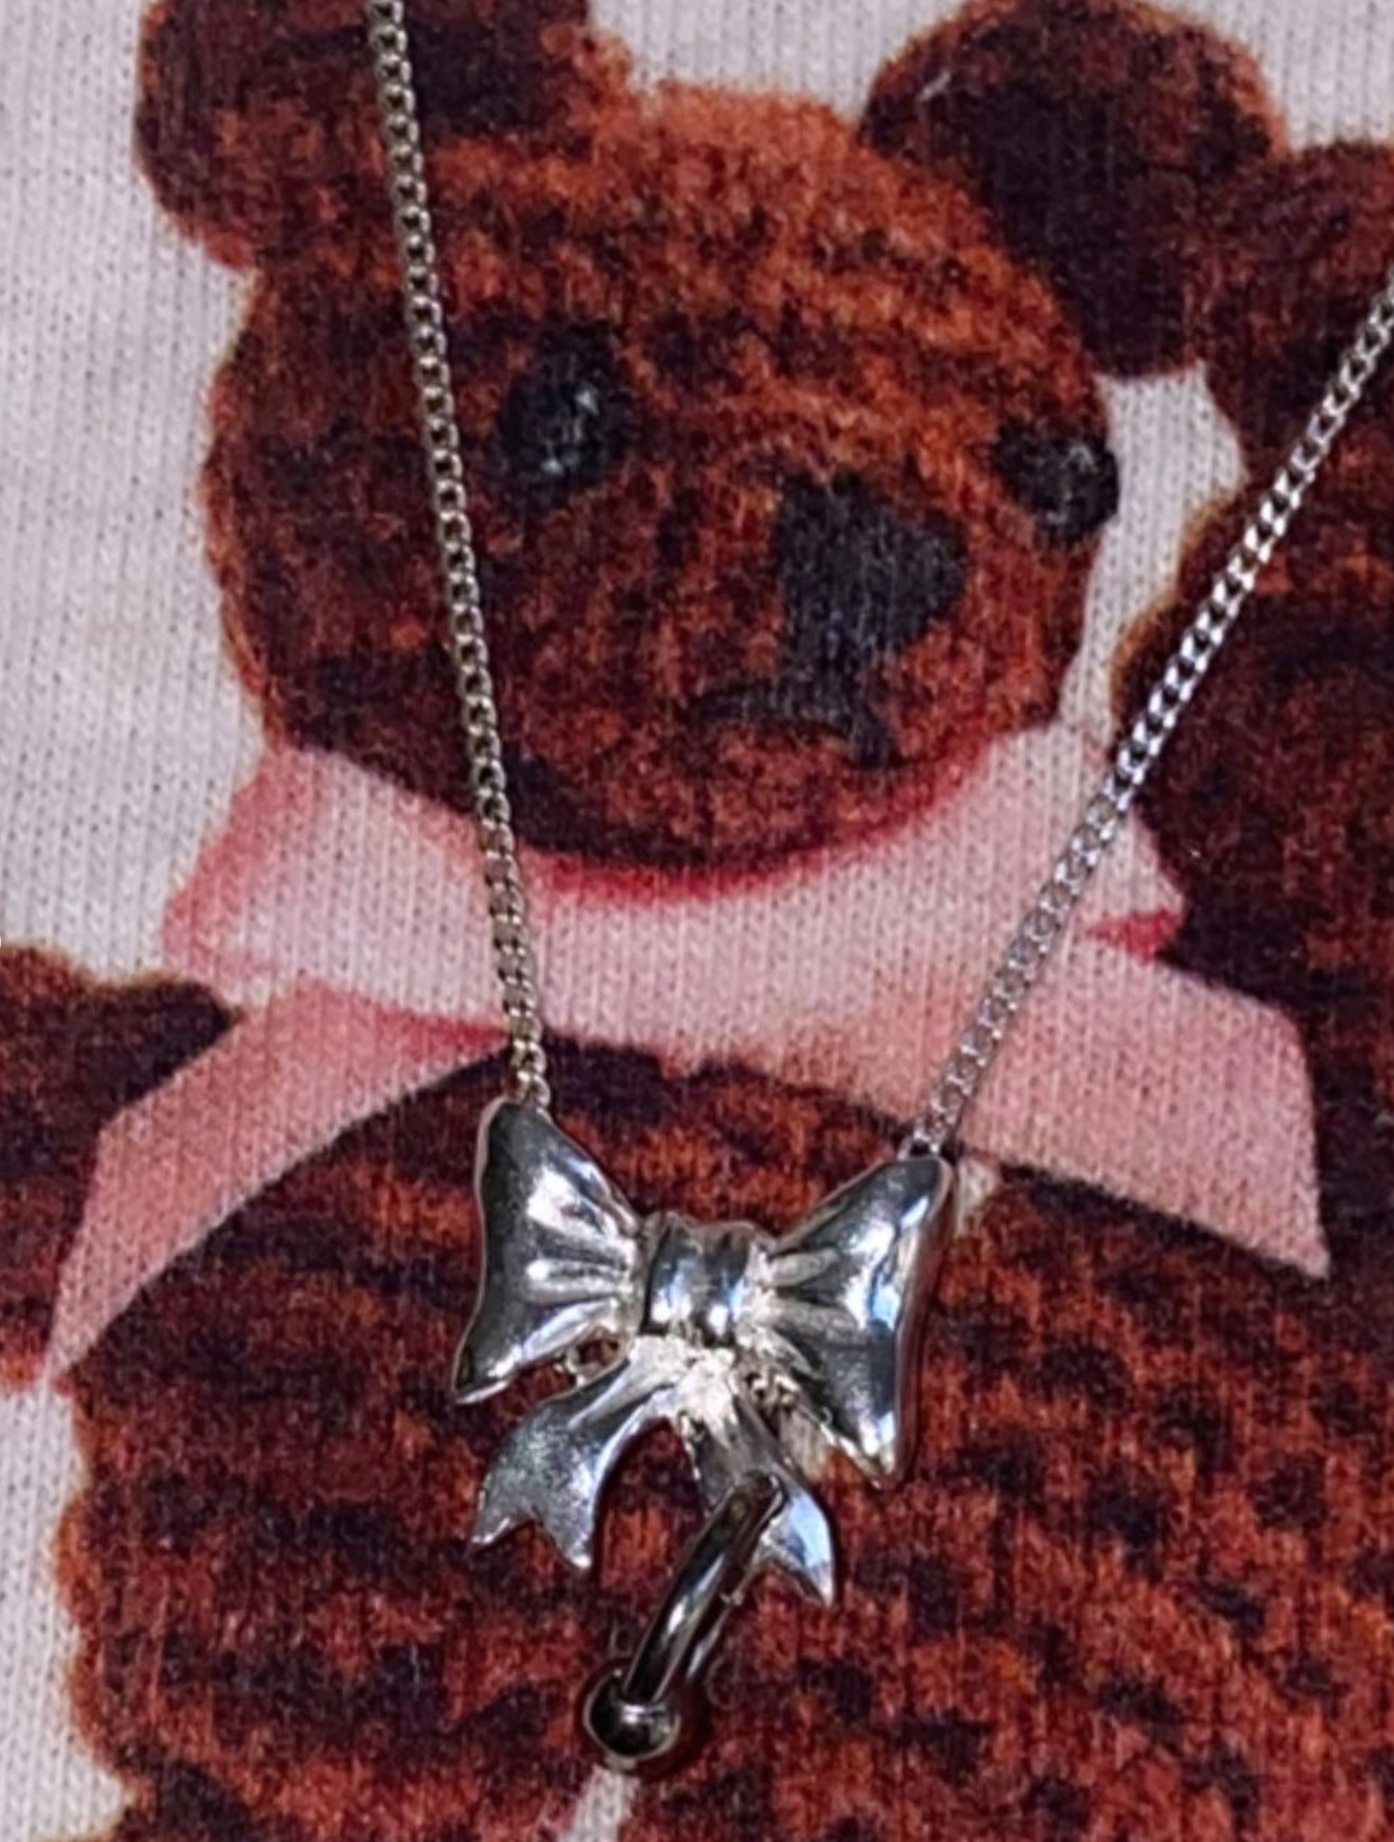 Pierced Baby Bow Necklace - Silver